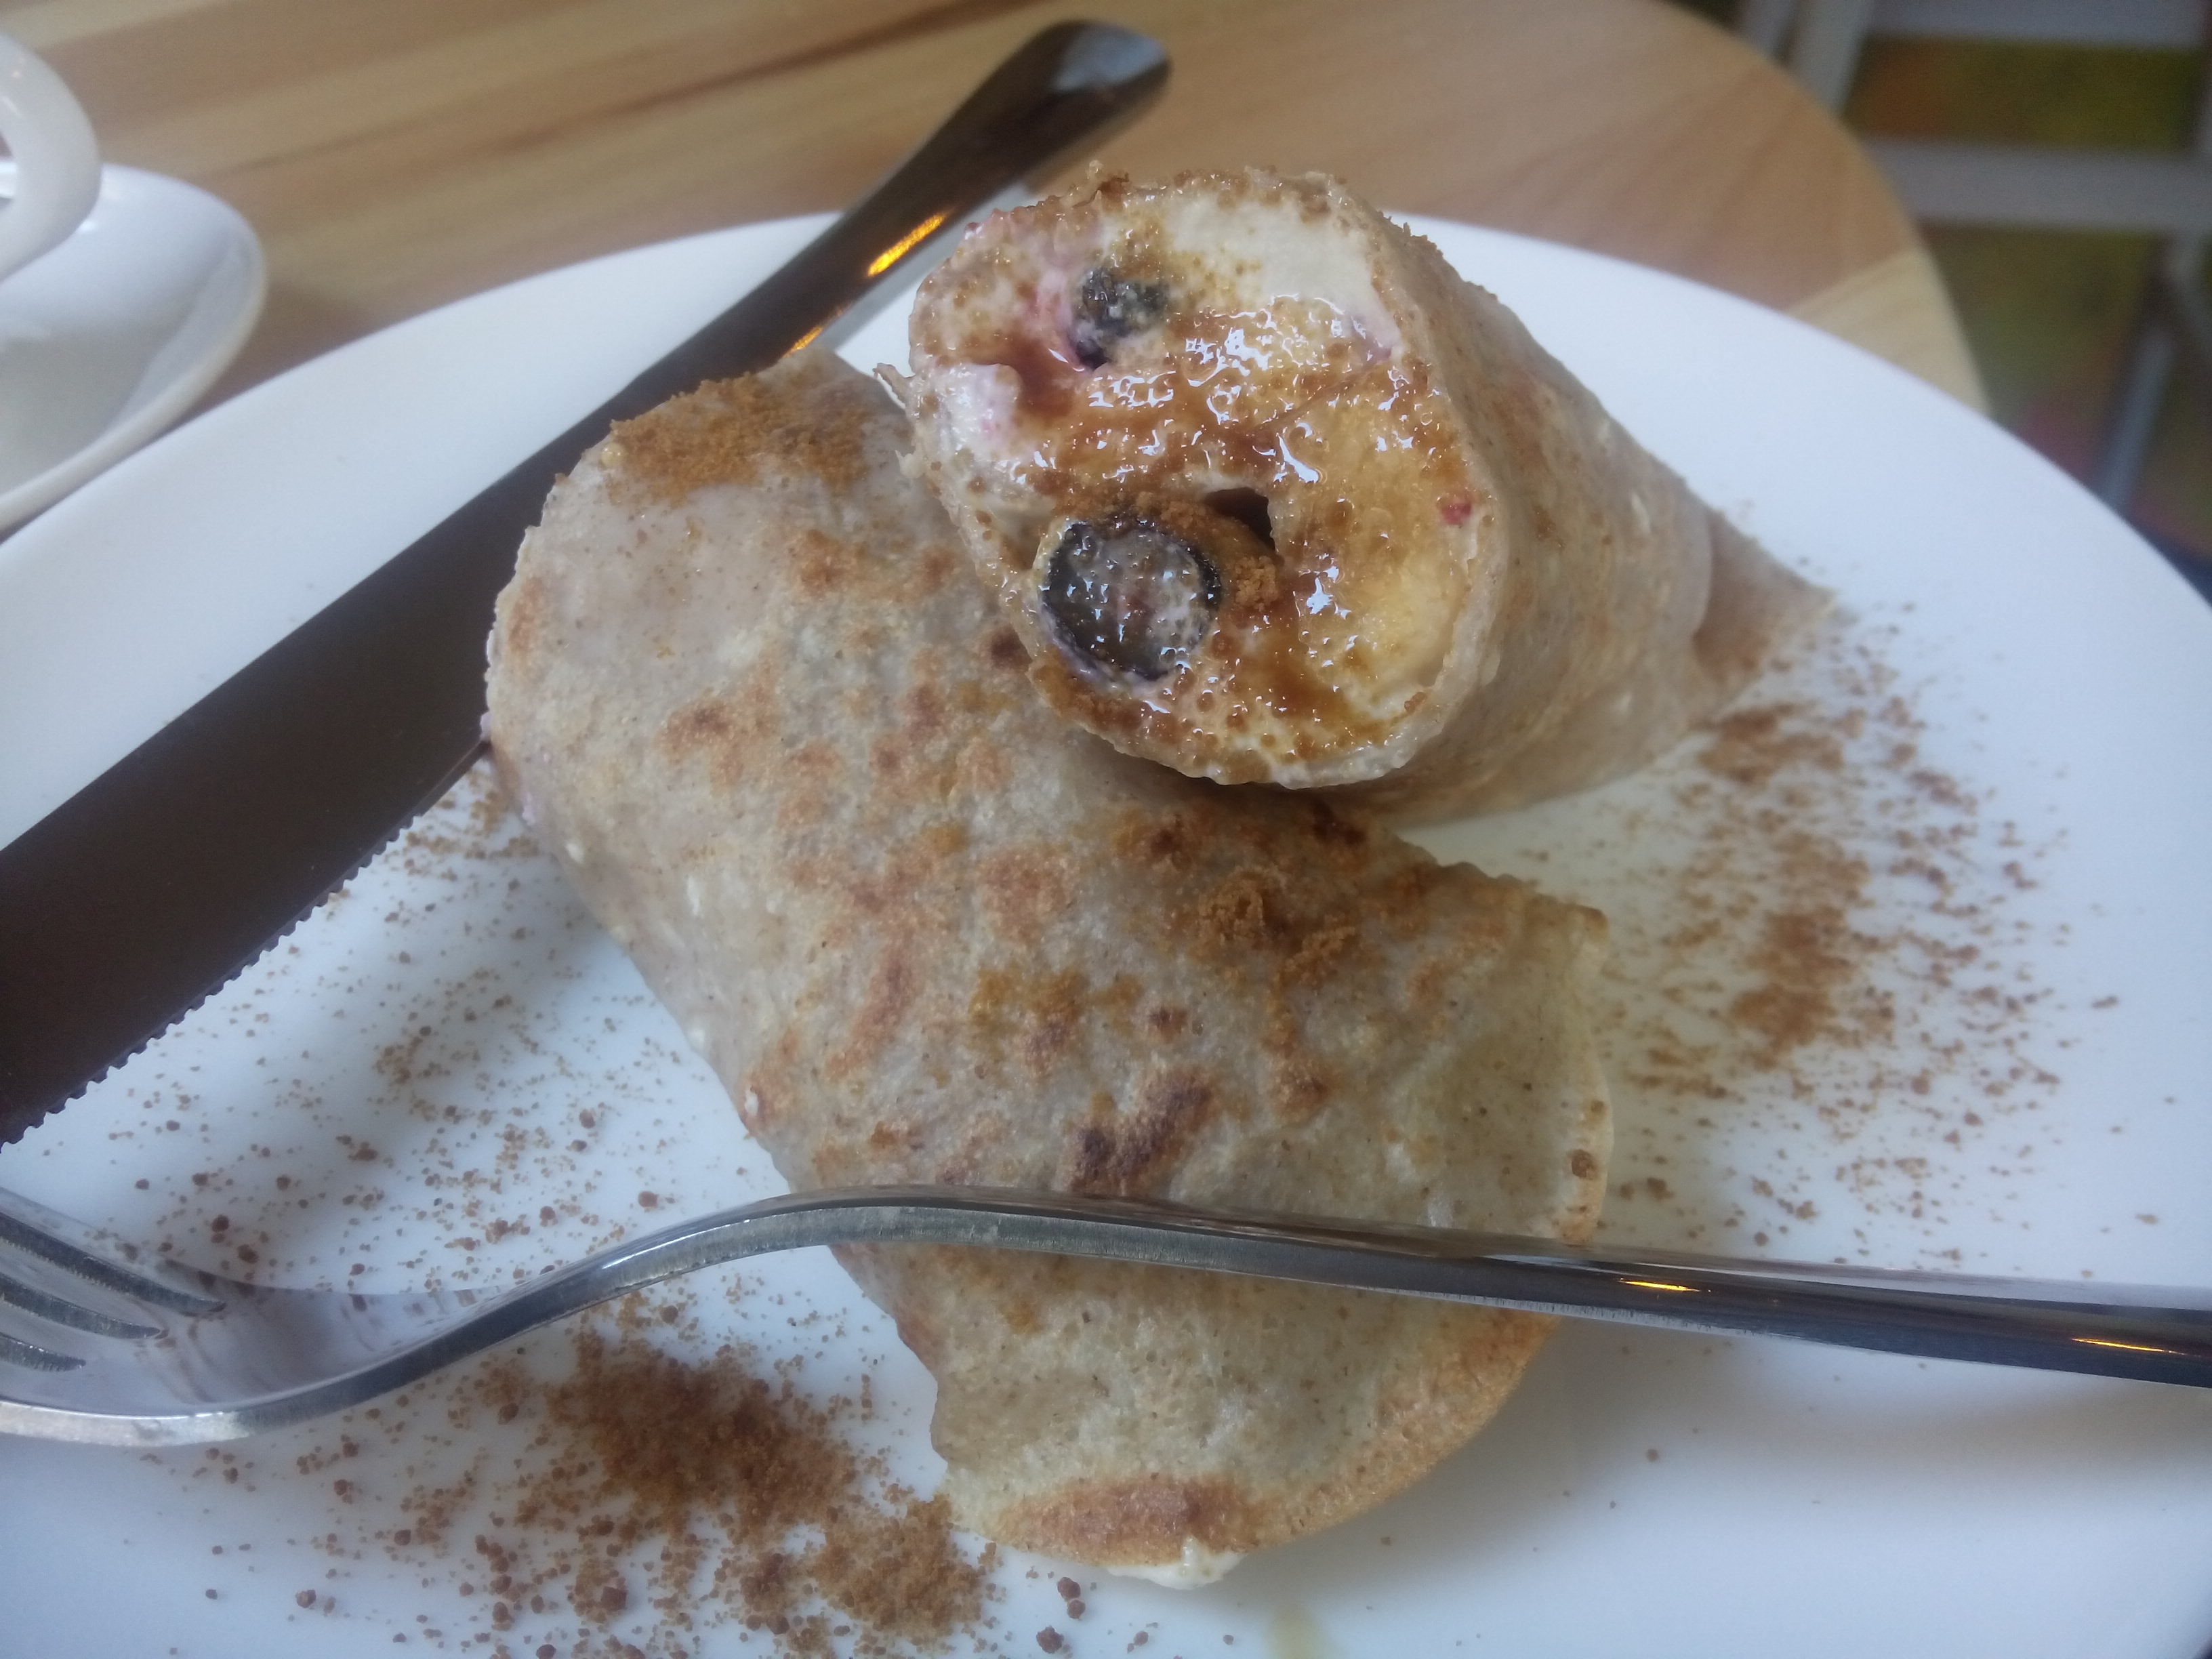 Two small pancake rolls on a white plate with scattered cinnamon and berries peaking out